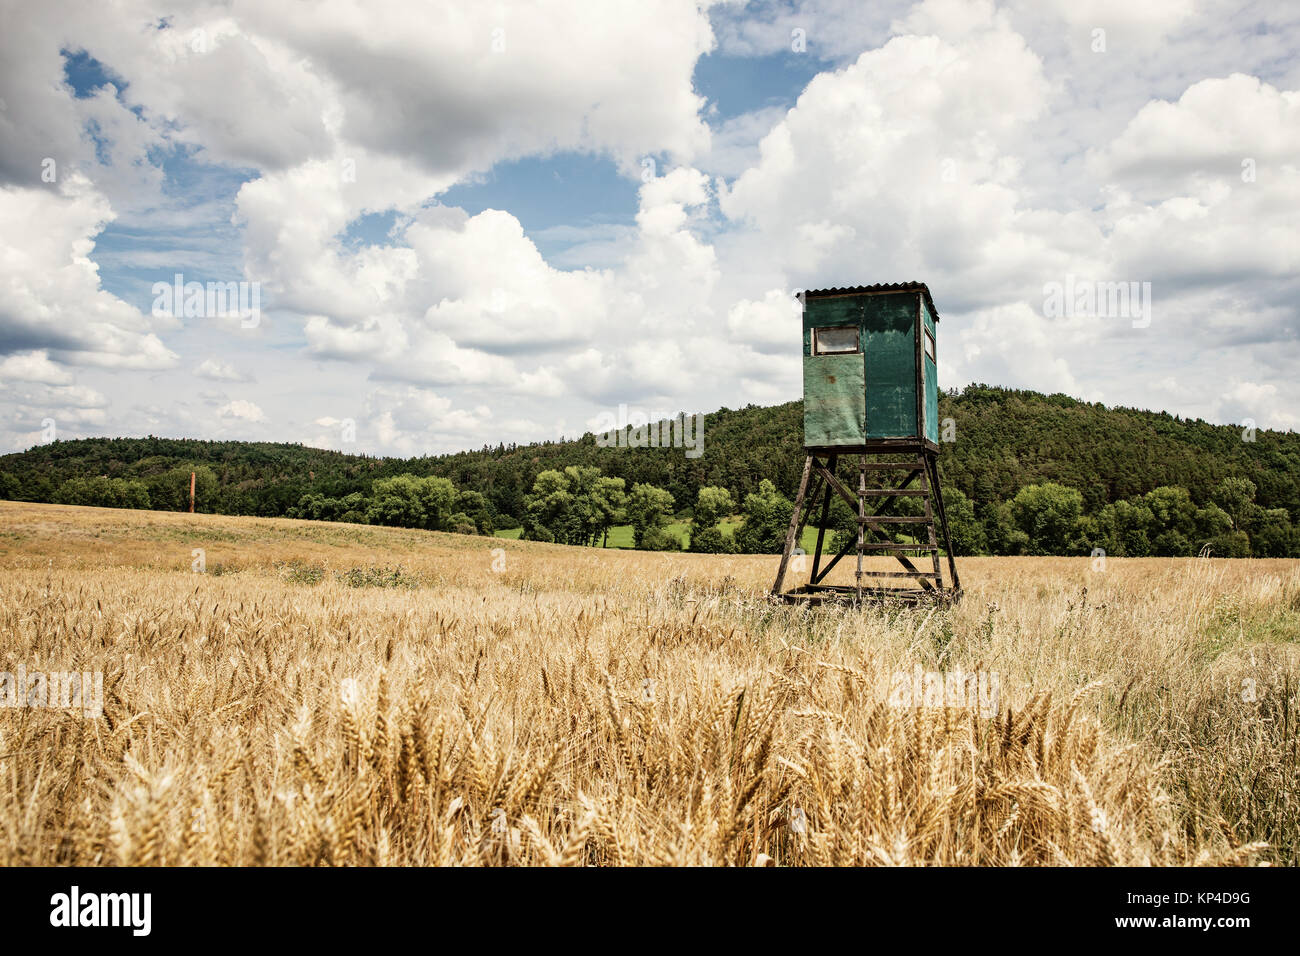 Animal watching tower on field. Sky with clouds. Stock Photo